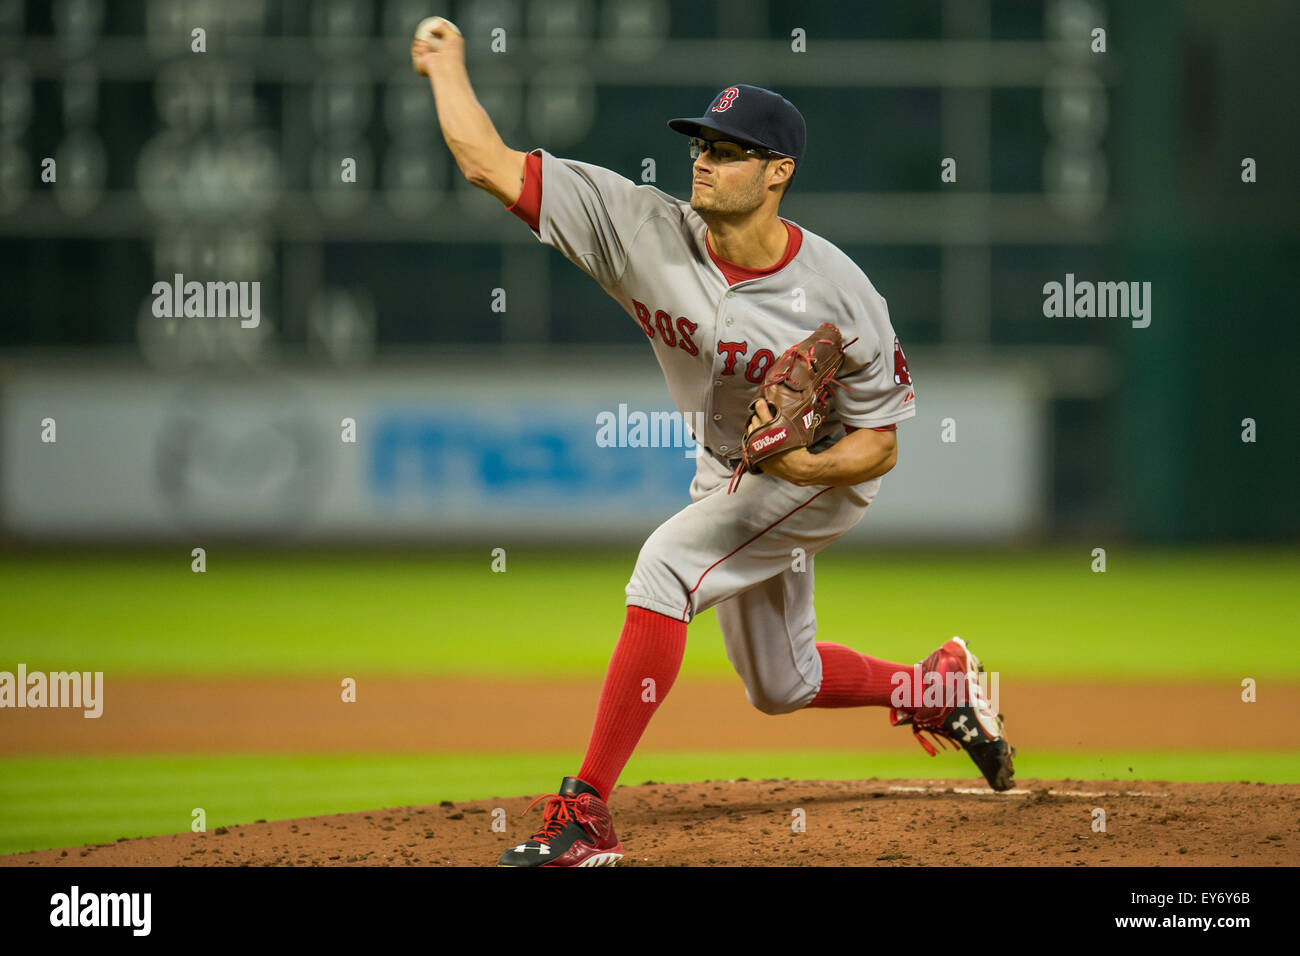 Houston, TX, USA. 22nd July, 2015. Boston Red Sox starting pitcher Joe Kelly (56) pitches during the 4th inning of a Major League Baseball game between the Houston Astros and the Boston Red Sox at Minute Maid Park in Houston, TX. Trask Smith/CSM/Alamy Live News Stock Photo